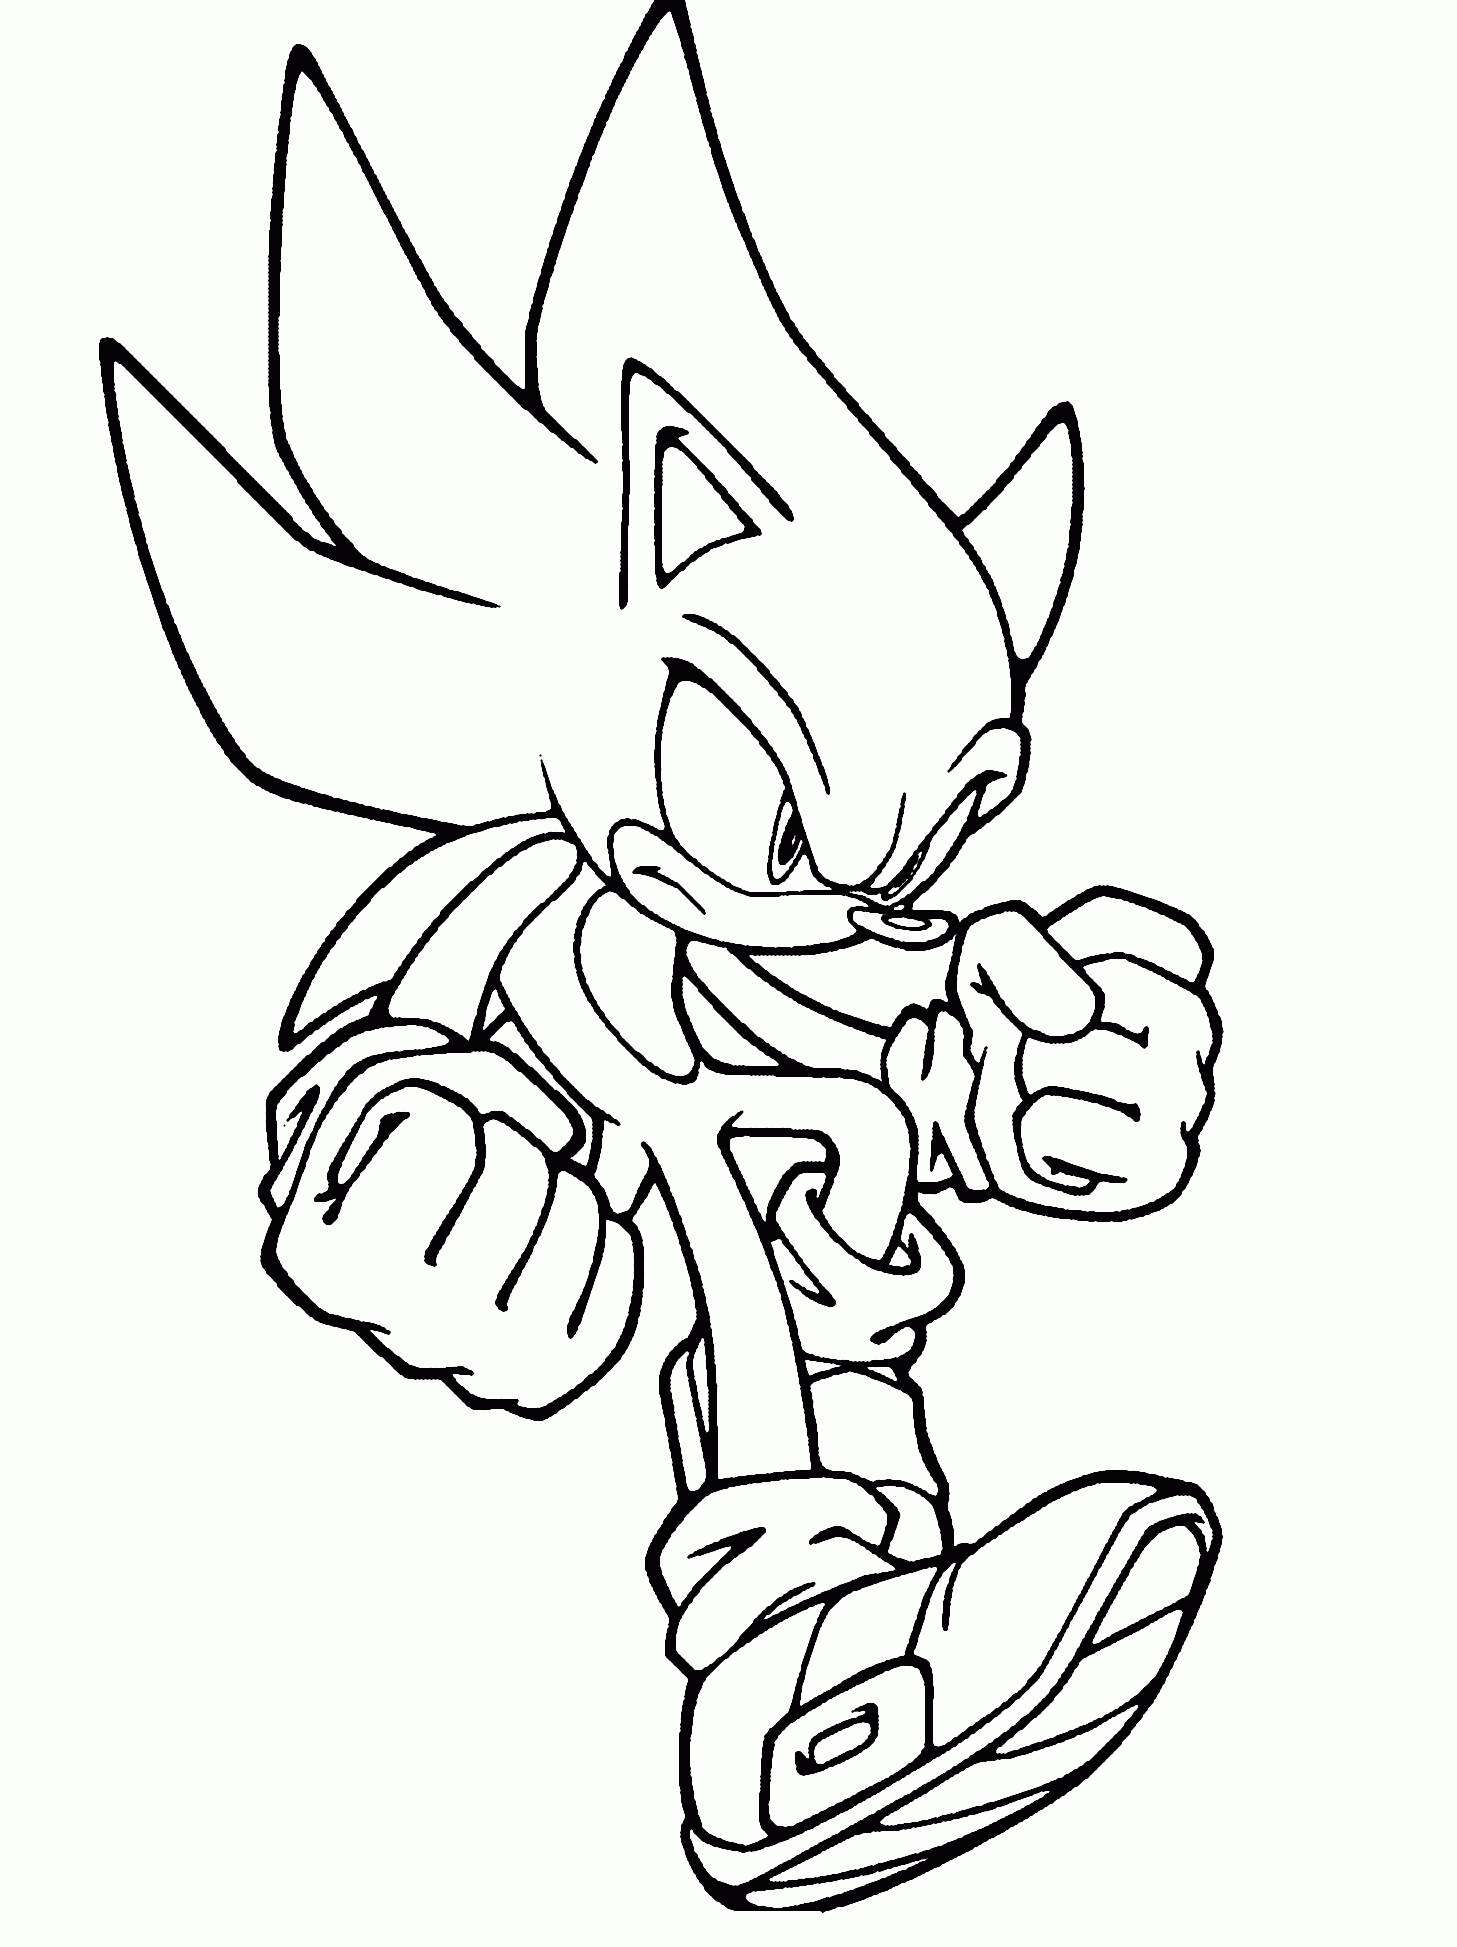 Sonic The Hedgehog Coloring Book Pages - Coloring Page Photos